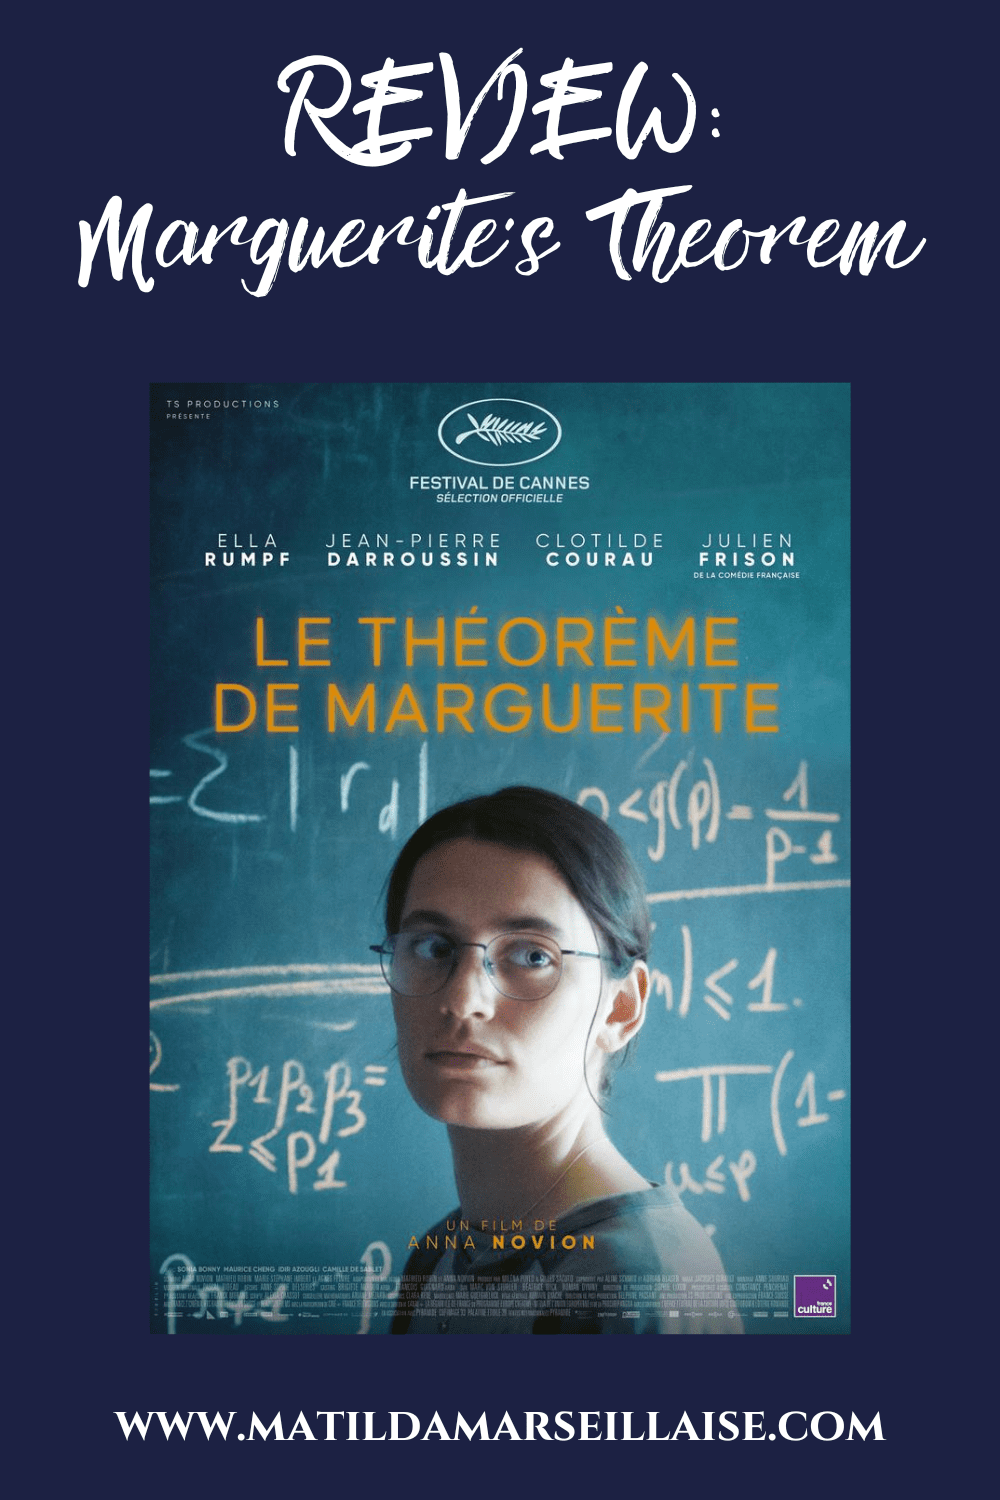 Marguerite’s Theorem is a film about finding yourself when all seems lost